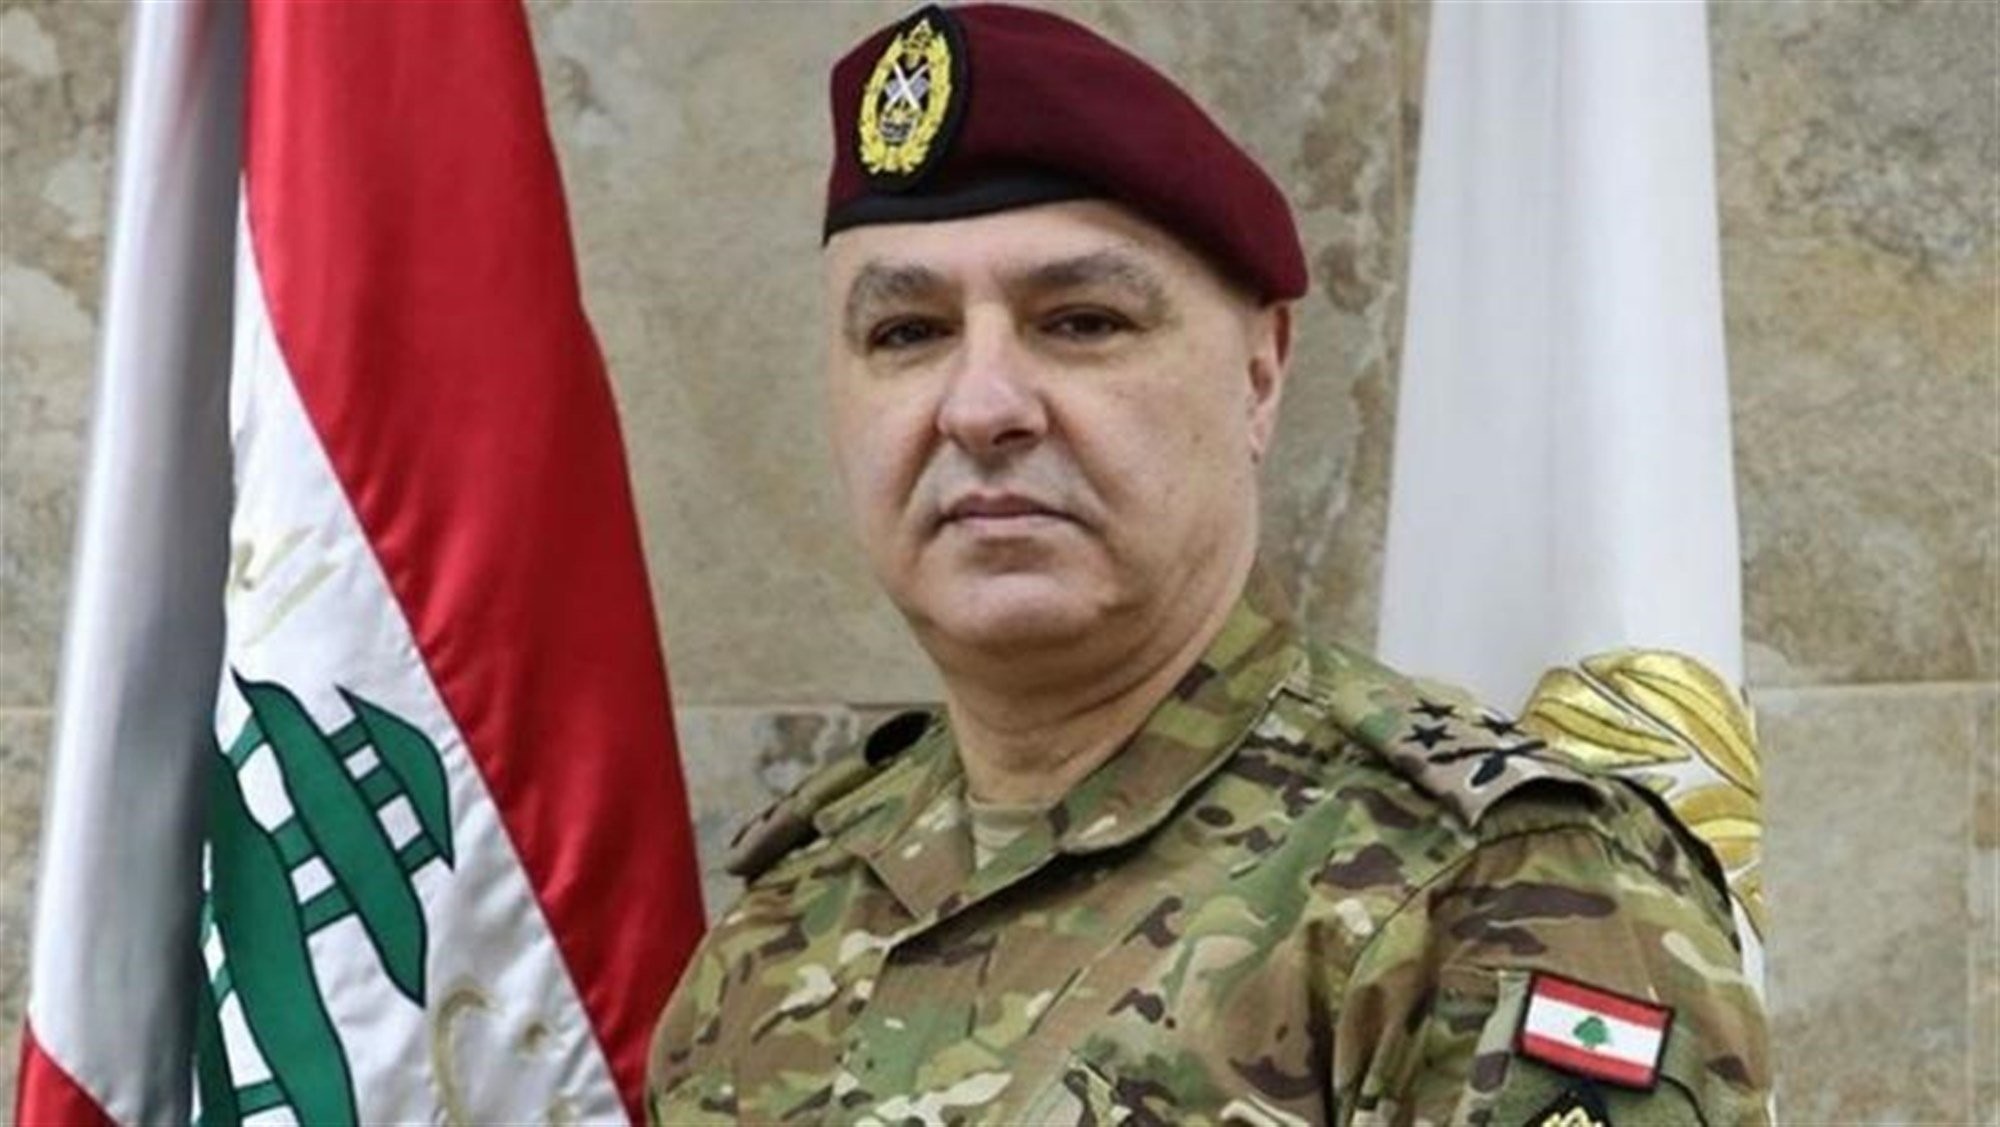 Lebanese Army Commander Congratulates Military on Successful Task